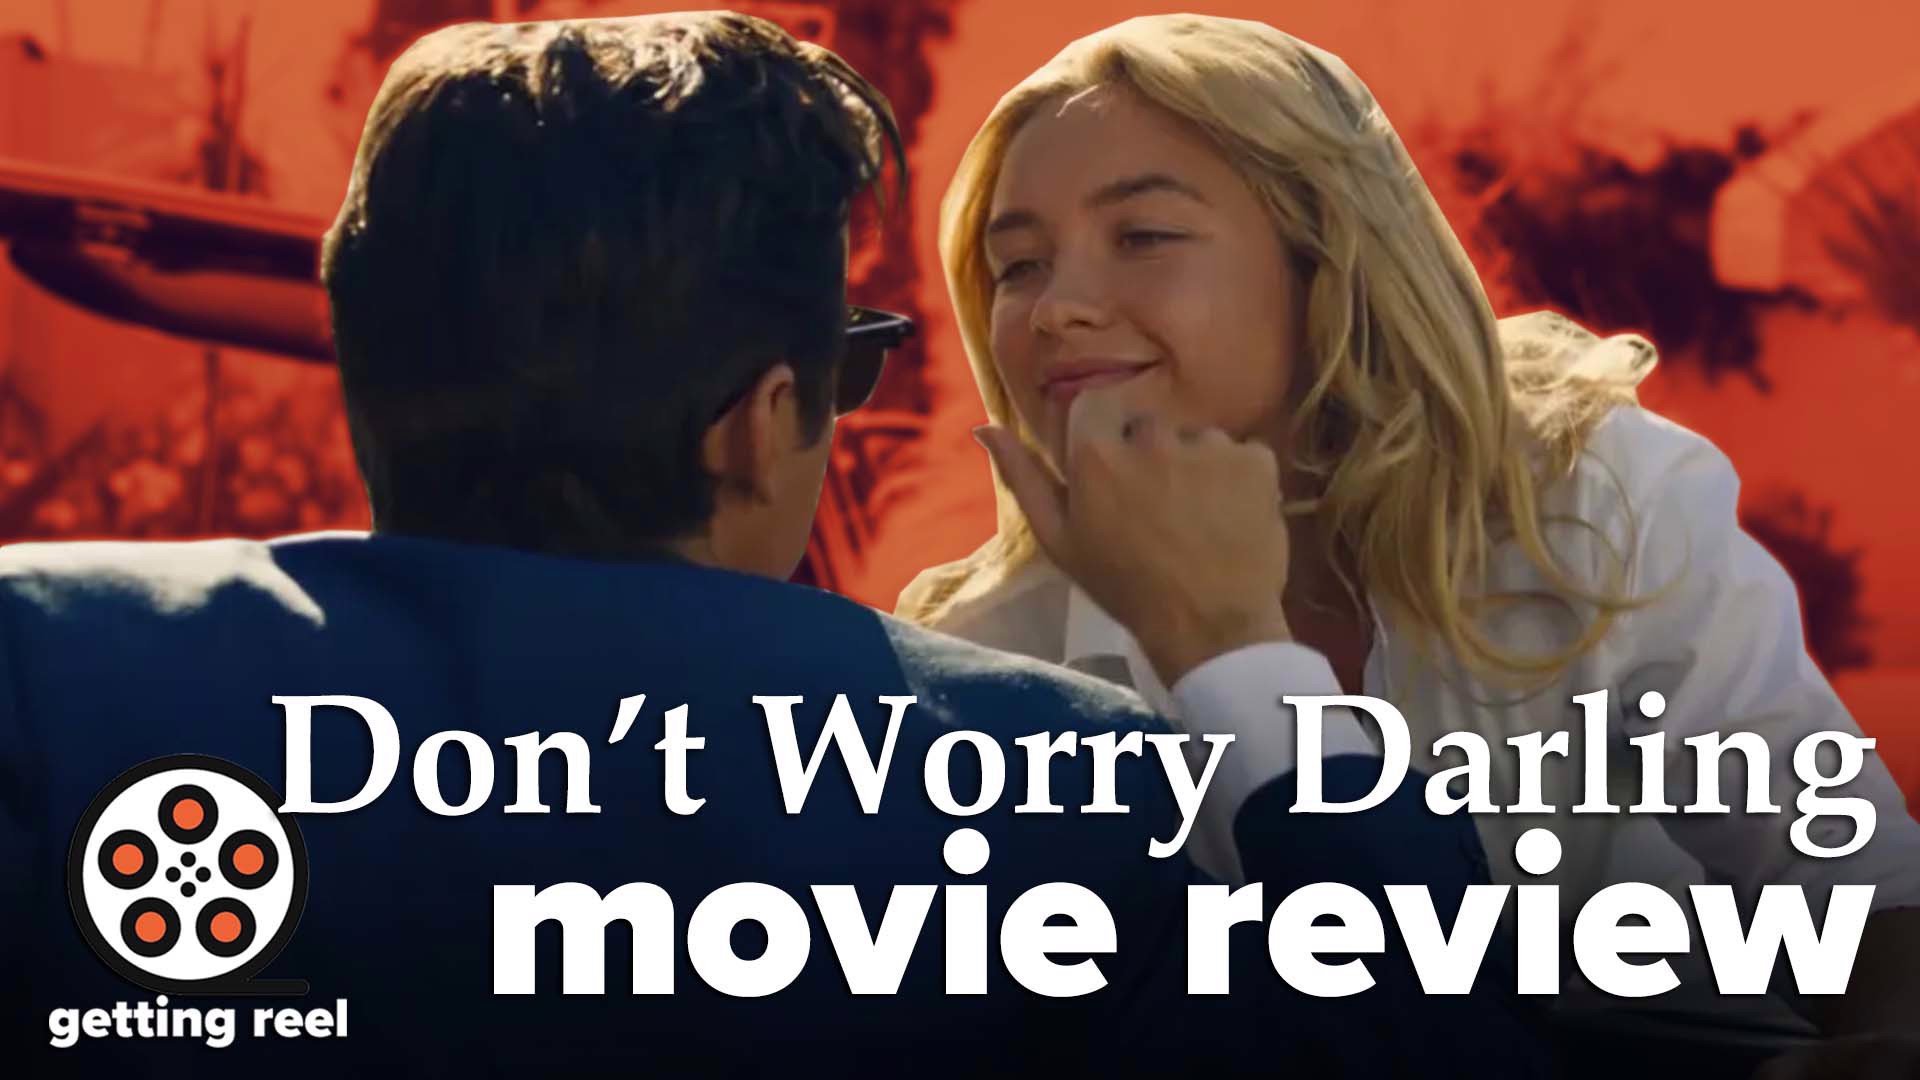 Lauren and Hana breakdown what they thought of Don't Worry Darling, starring Florence Pugh and Harry Styles.